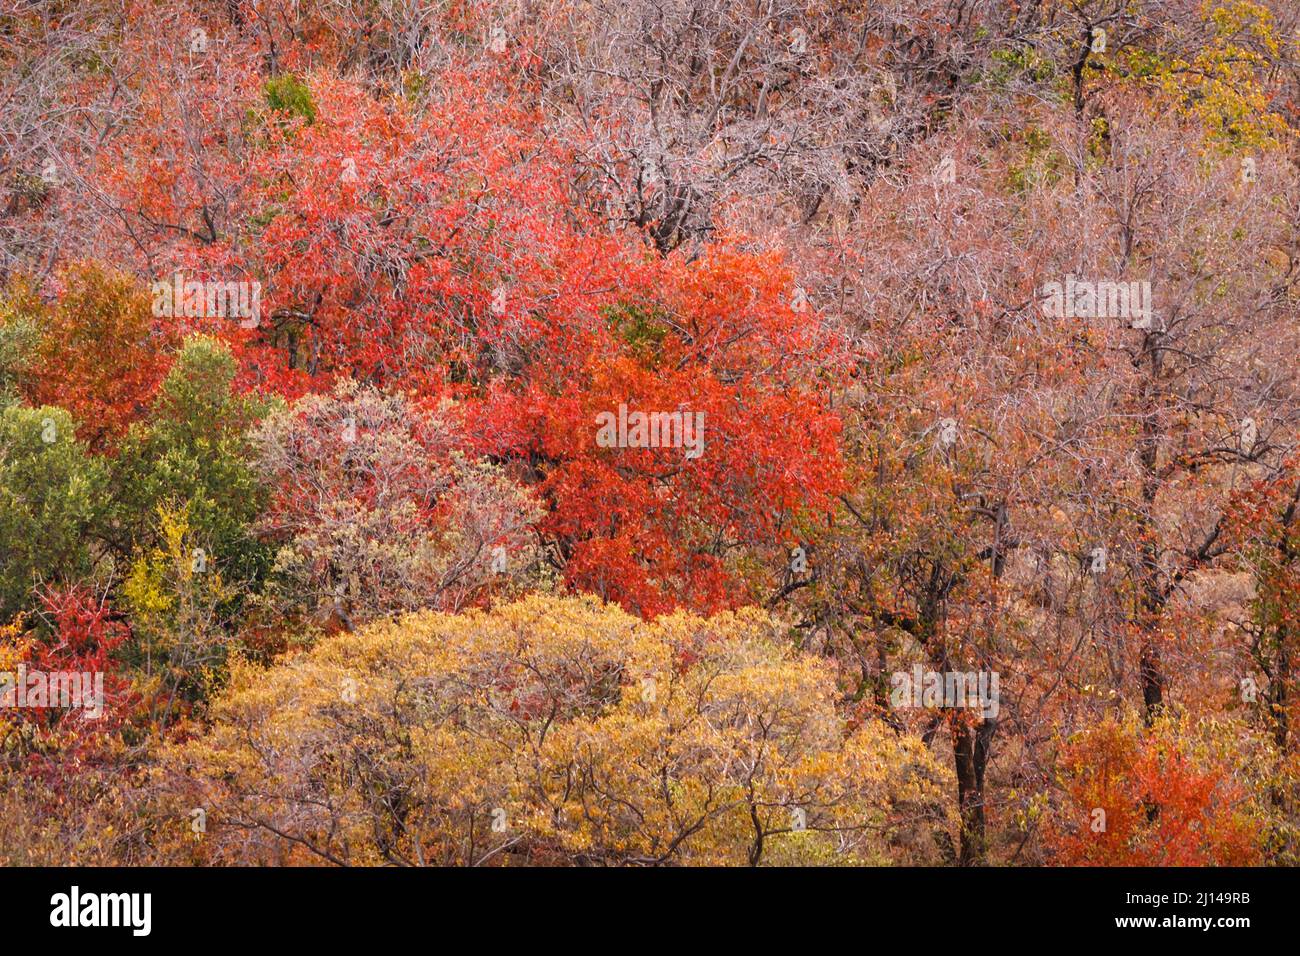 Colourful autumn leaves and branches of bushveld vegetation on kopje slope, Pilansberg National Park, North West Province, South Africa Stock Photo